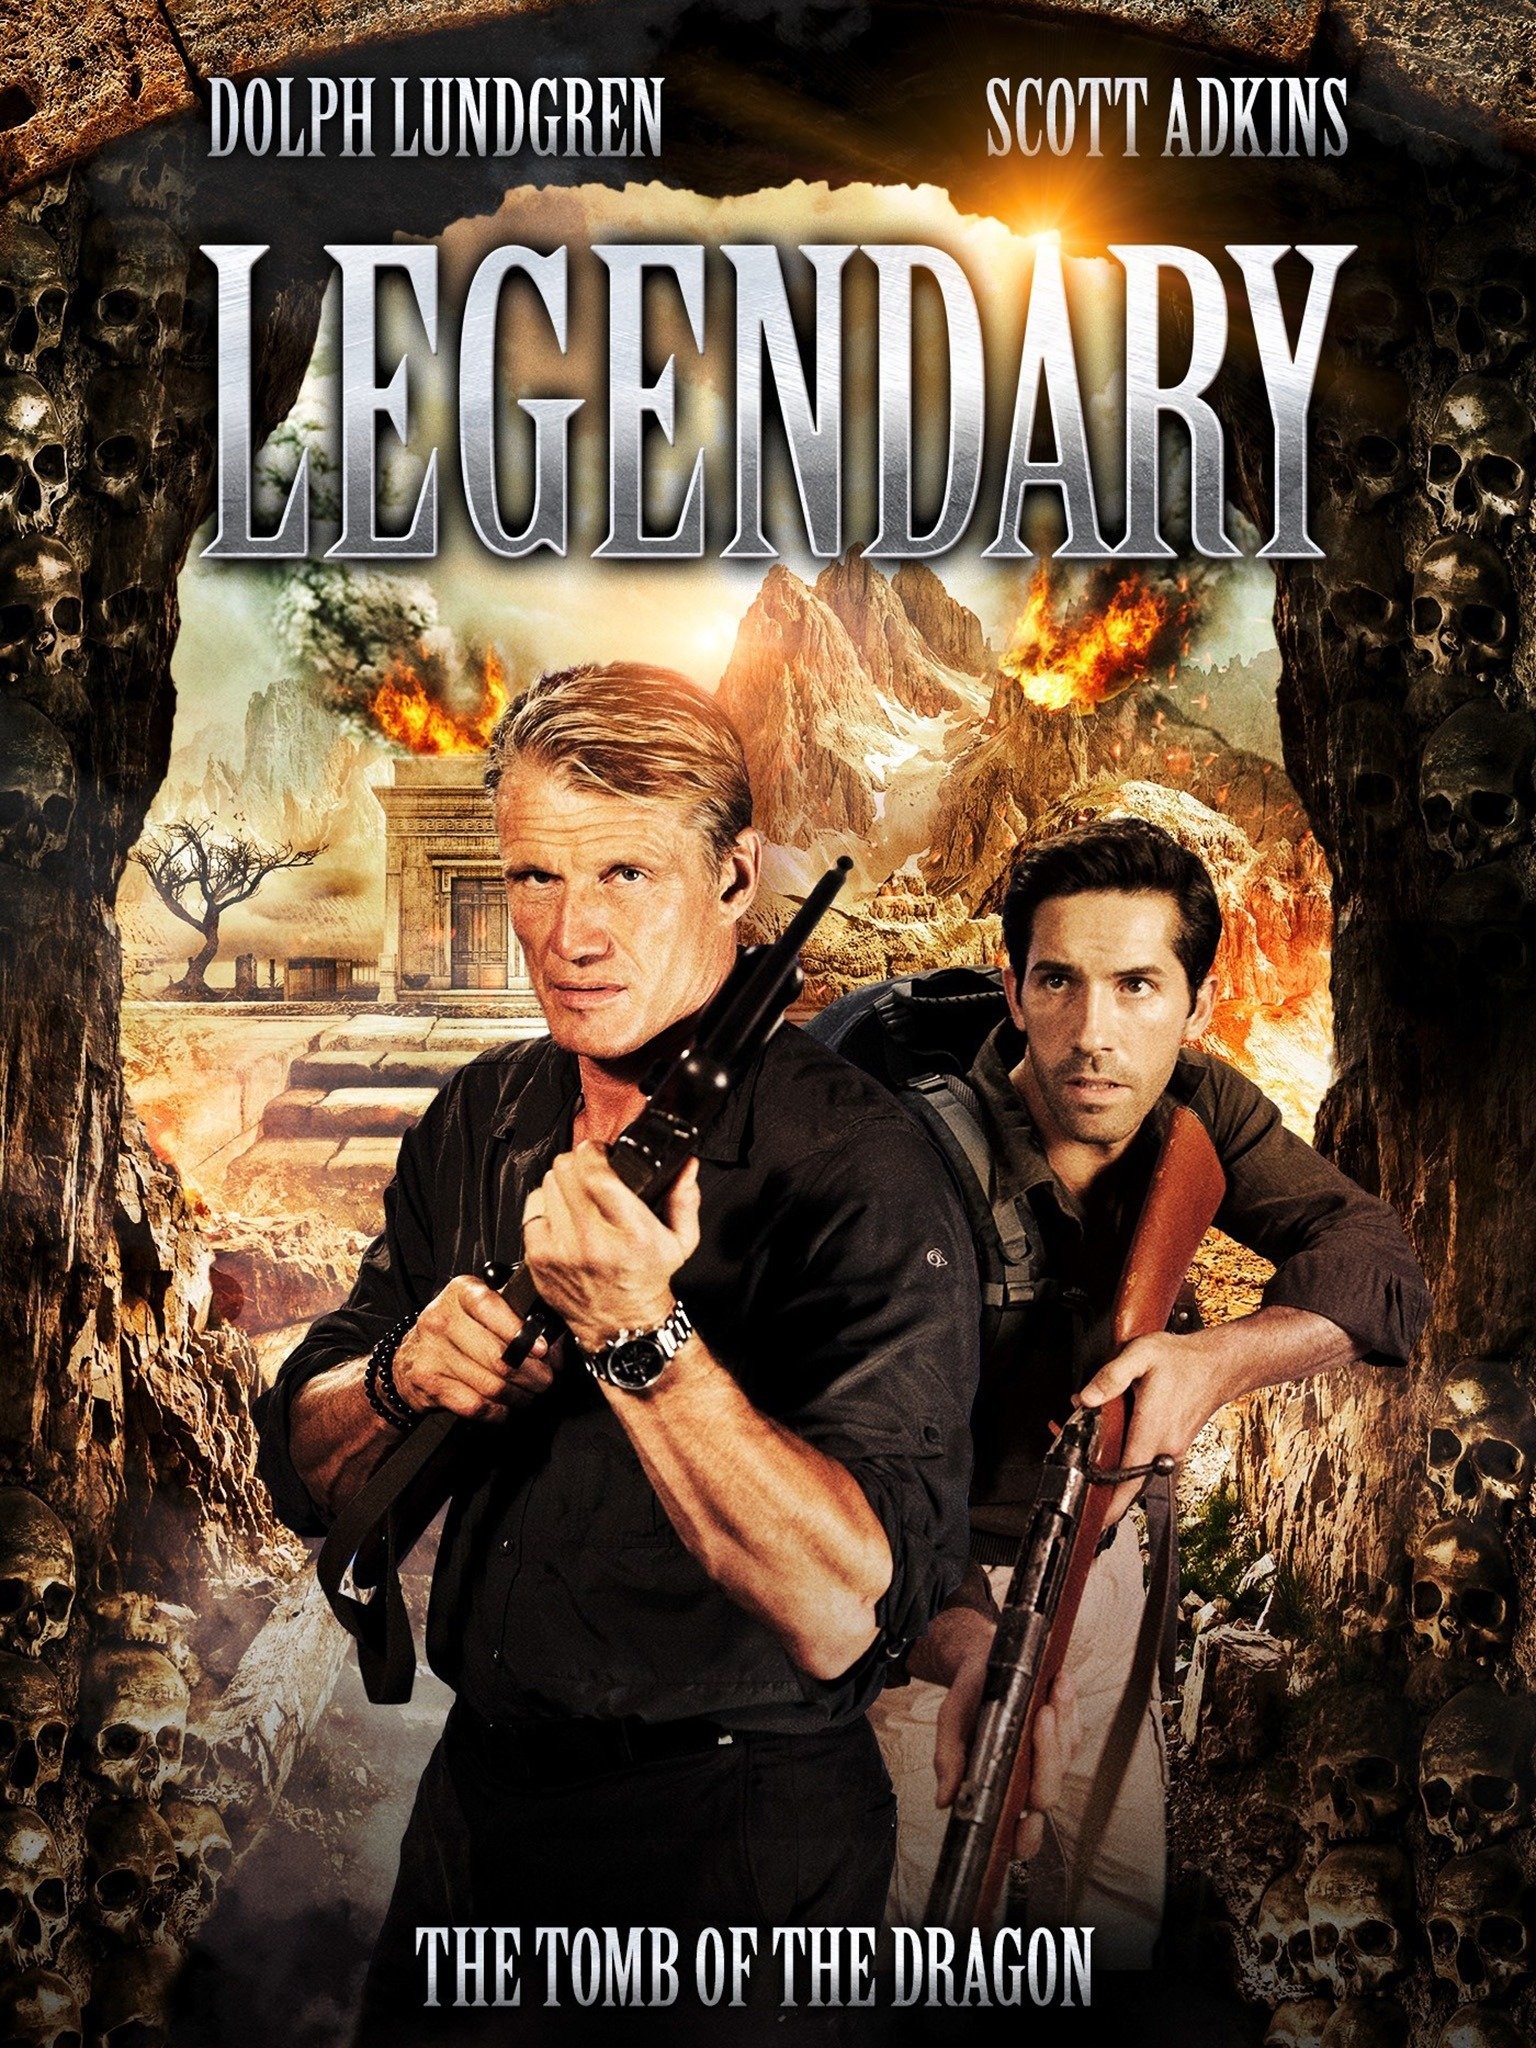 Legendary: Tomb of the Dragon | Rotten Tomatoes